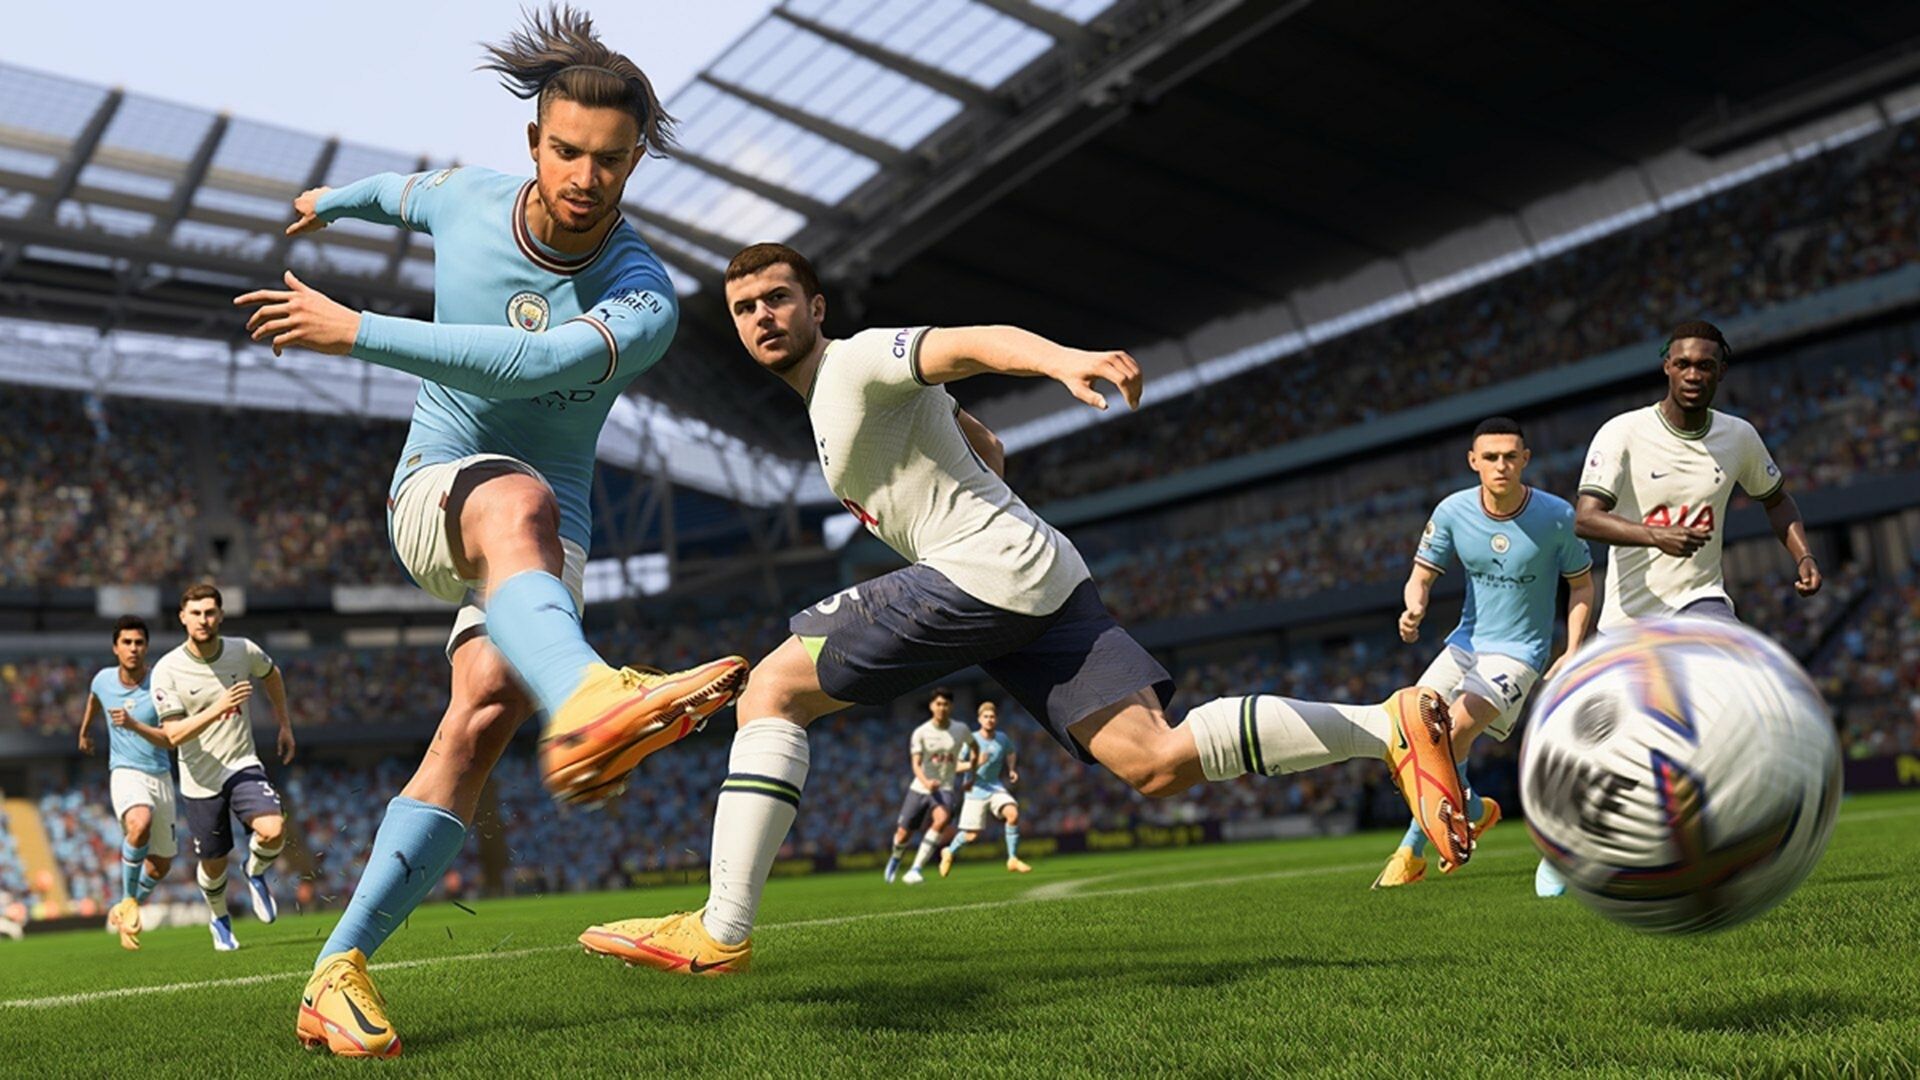 In this article, we will be covering what's new in FIFA 23 career mode, so you know what the expect from the latest entry in the franchise.